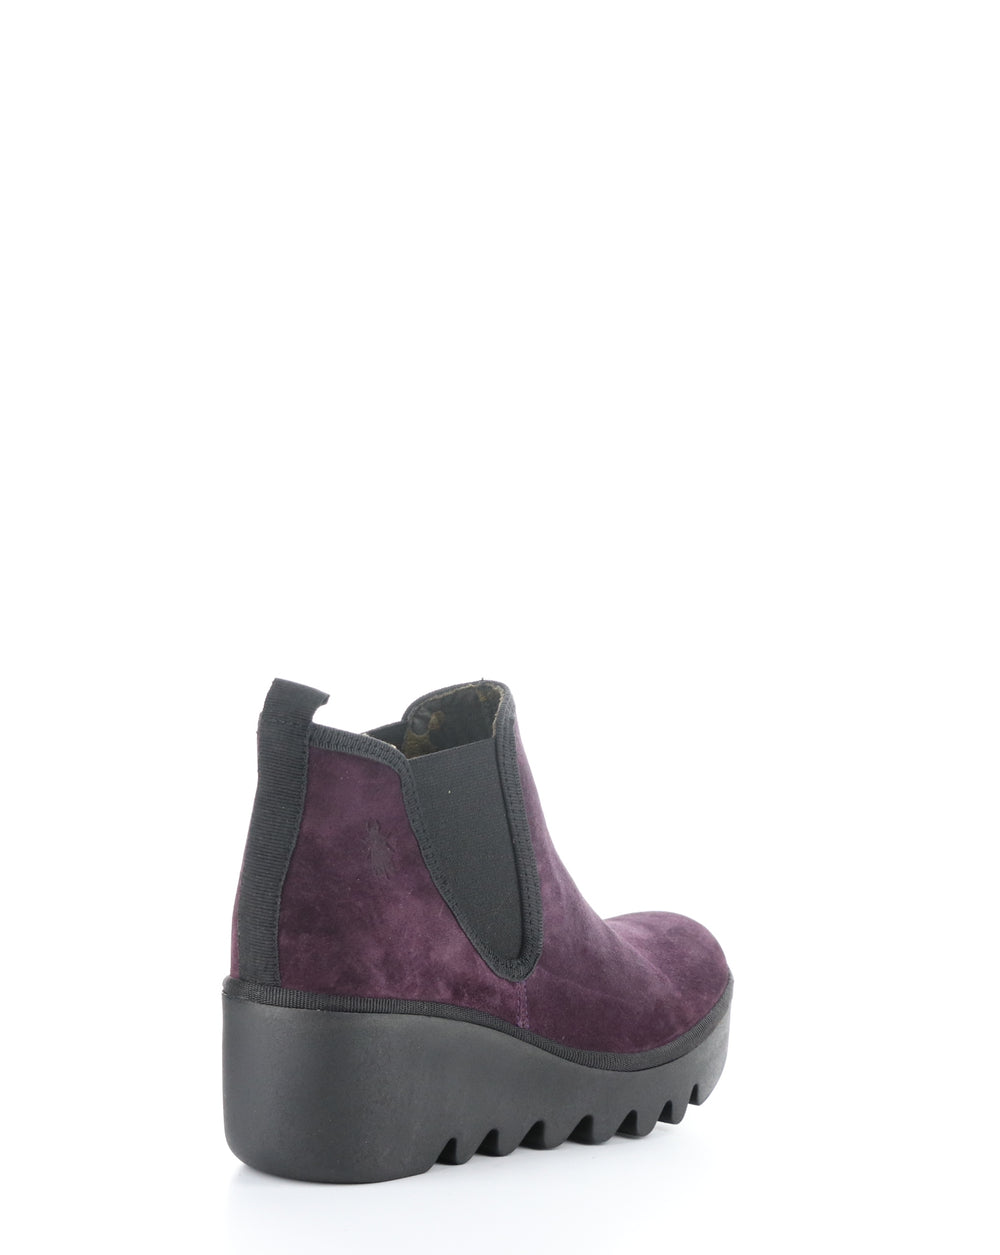 BYNE349FLY 022 PURPLE Elasticated Boots